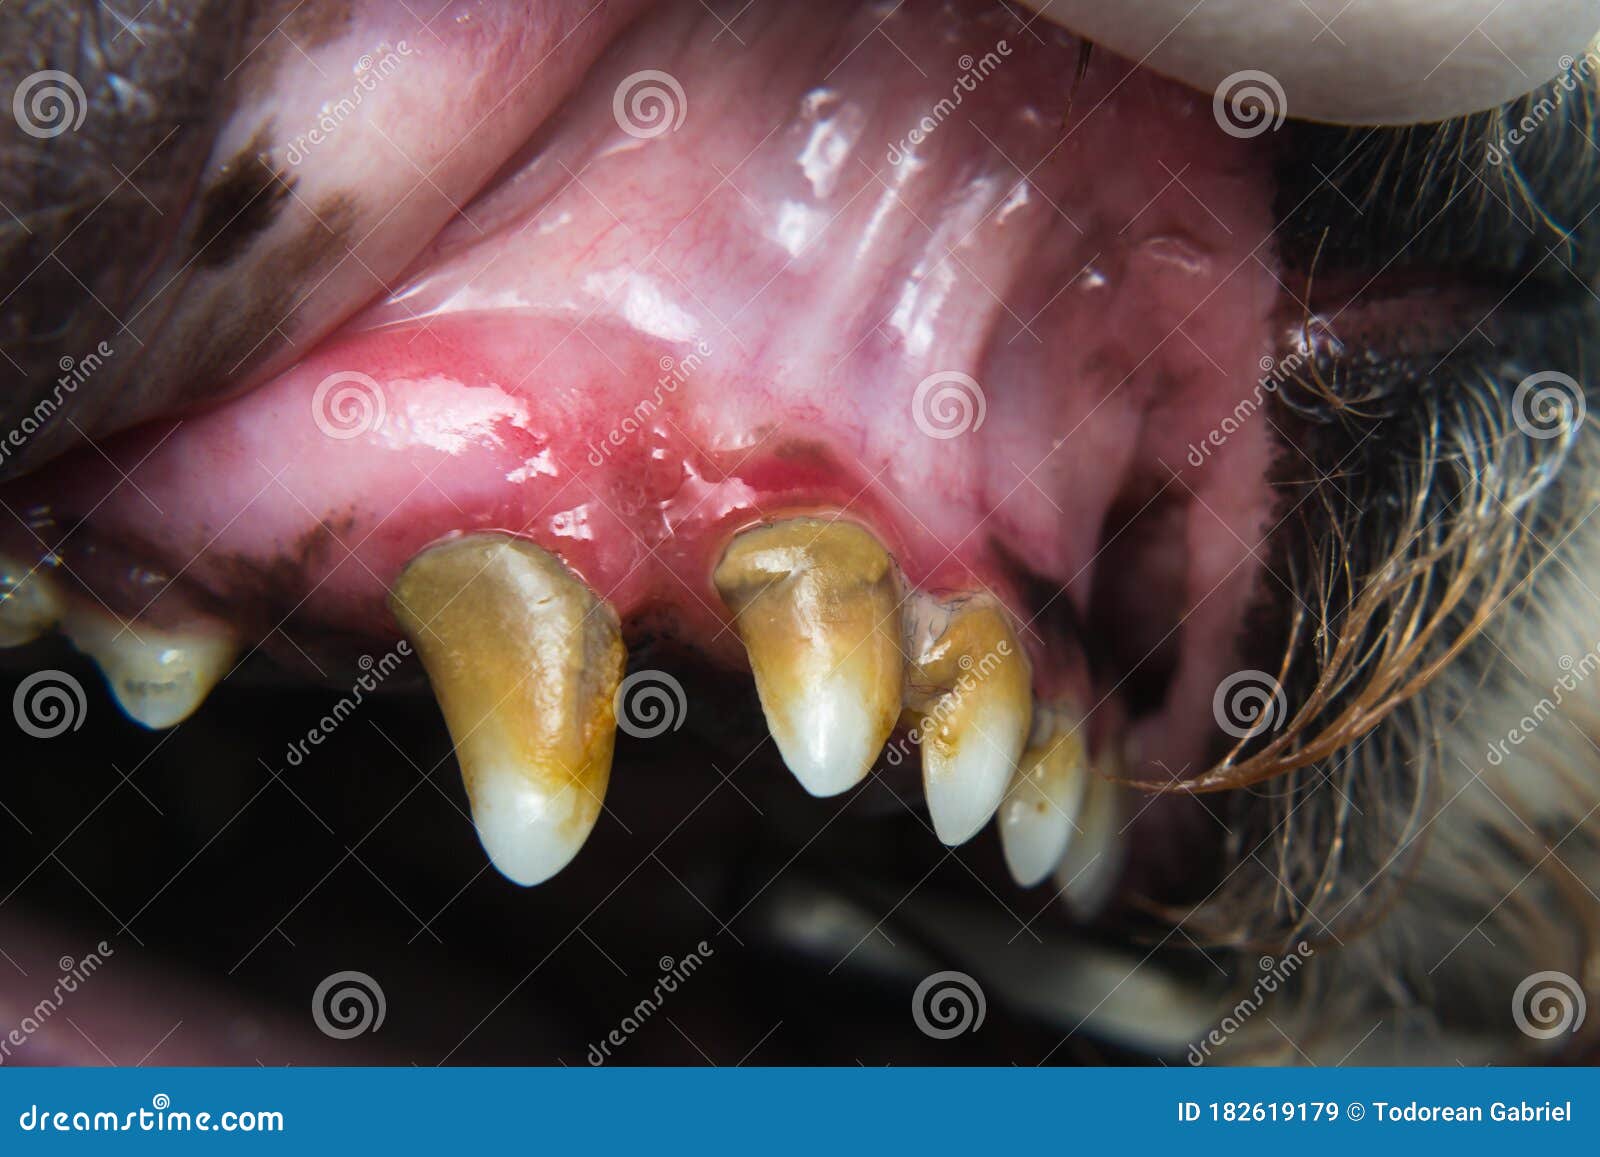 forfængelighed kan opfattes Polar Dog with Gingivitis and Teeth with Tartar Stock Image - Image of gingival,  gingivitis: 182619179